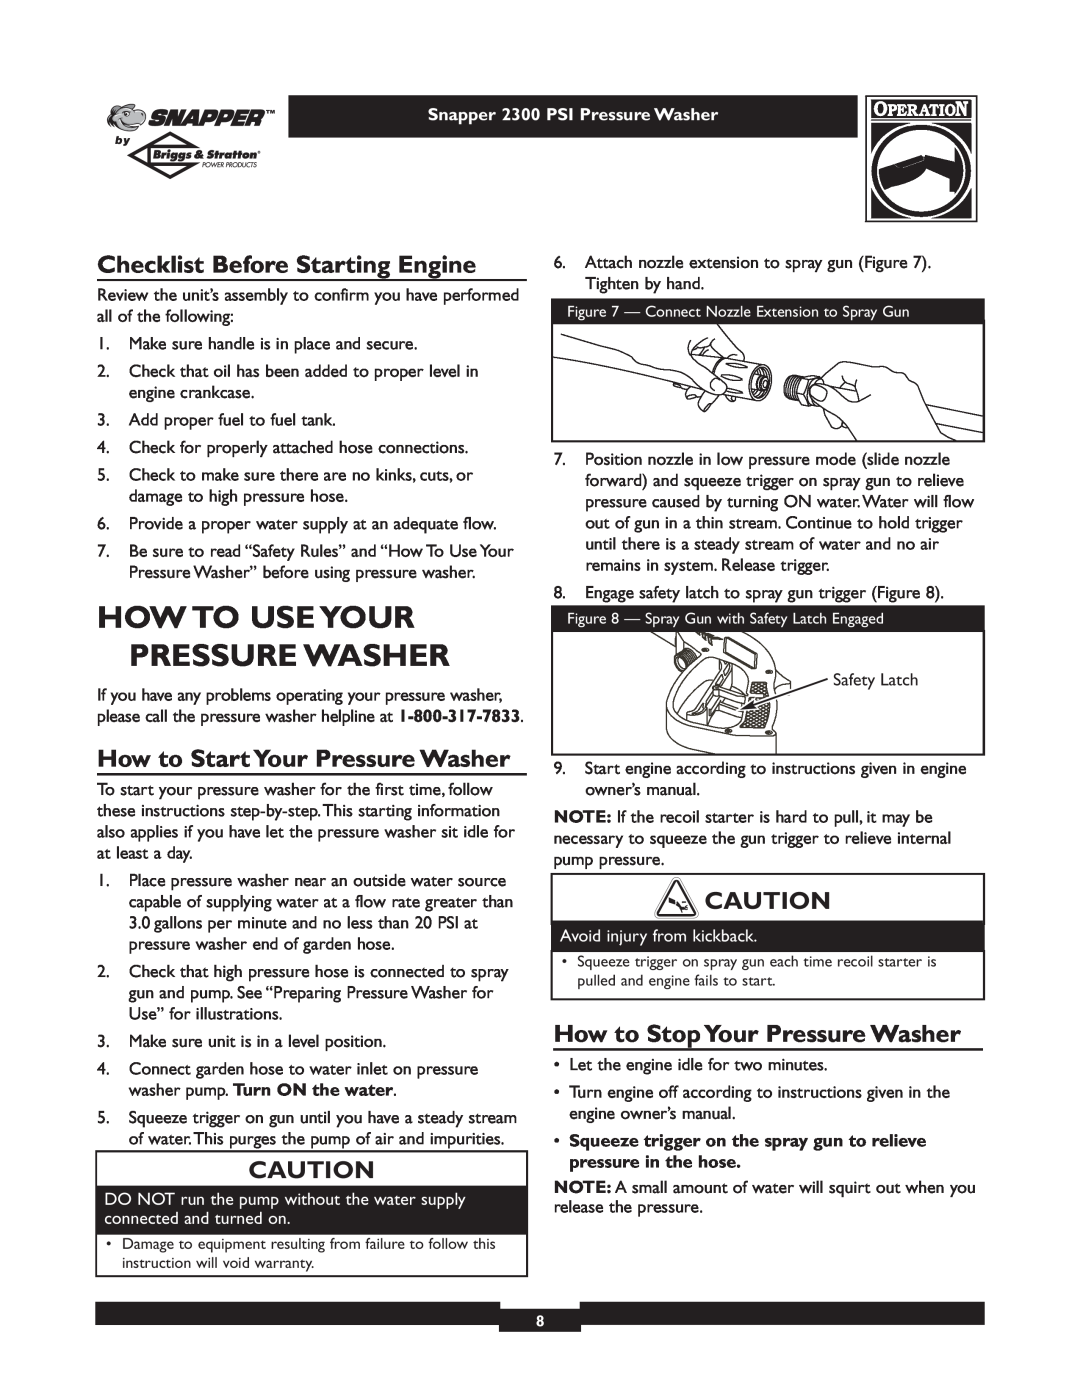 Snapper 1807-1 How To Use Your Pressure Washer, Checklist Before Starting Engine, How to Start Your Pressure Washer 